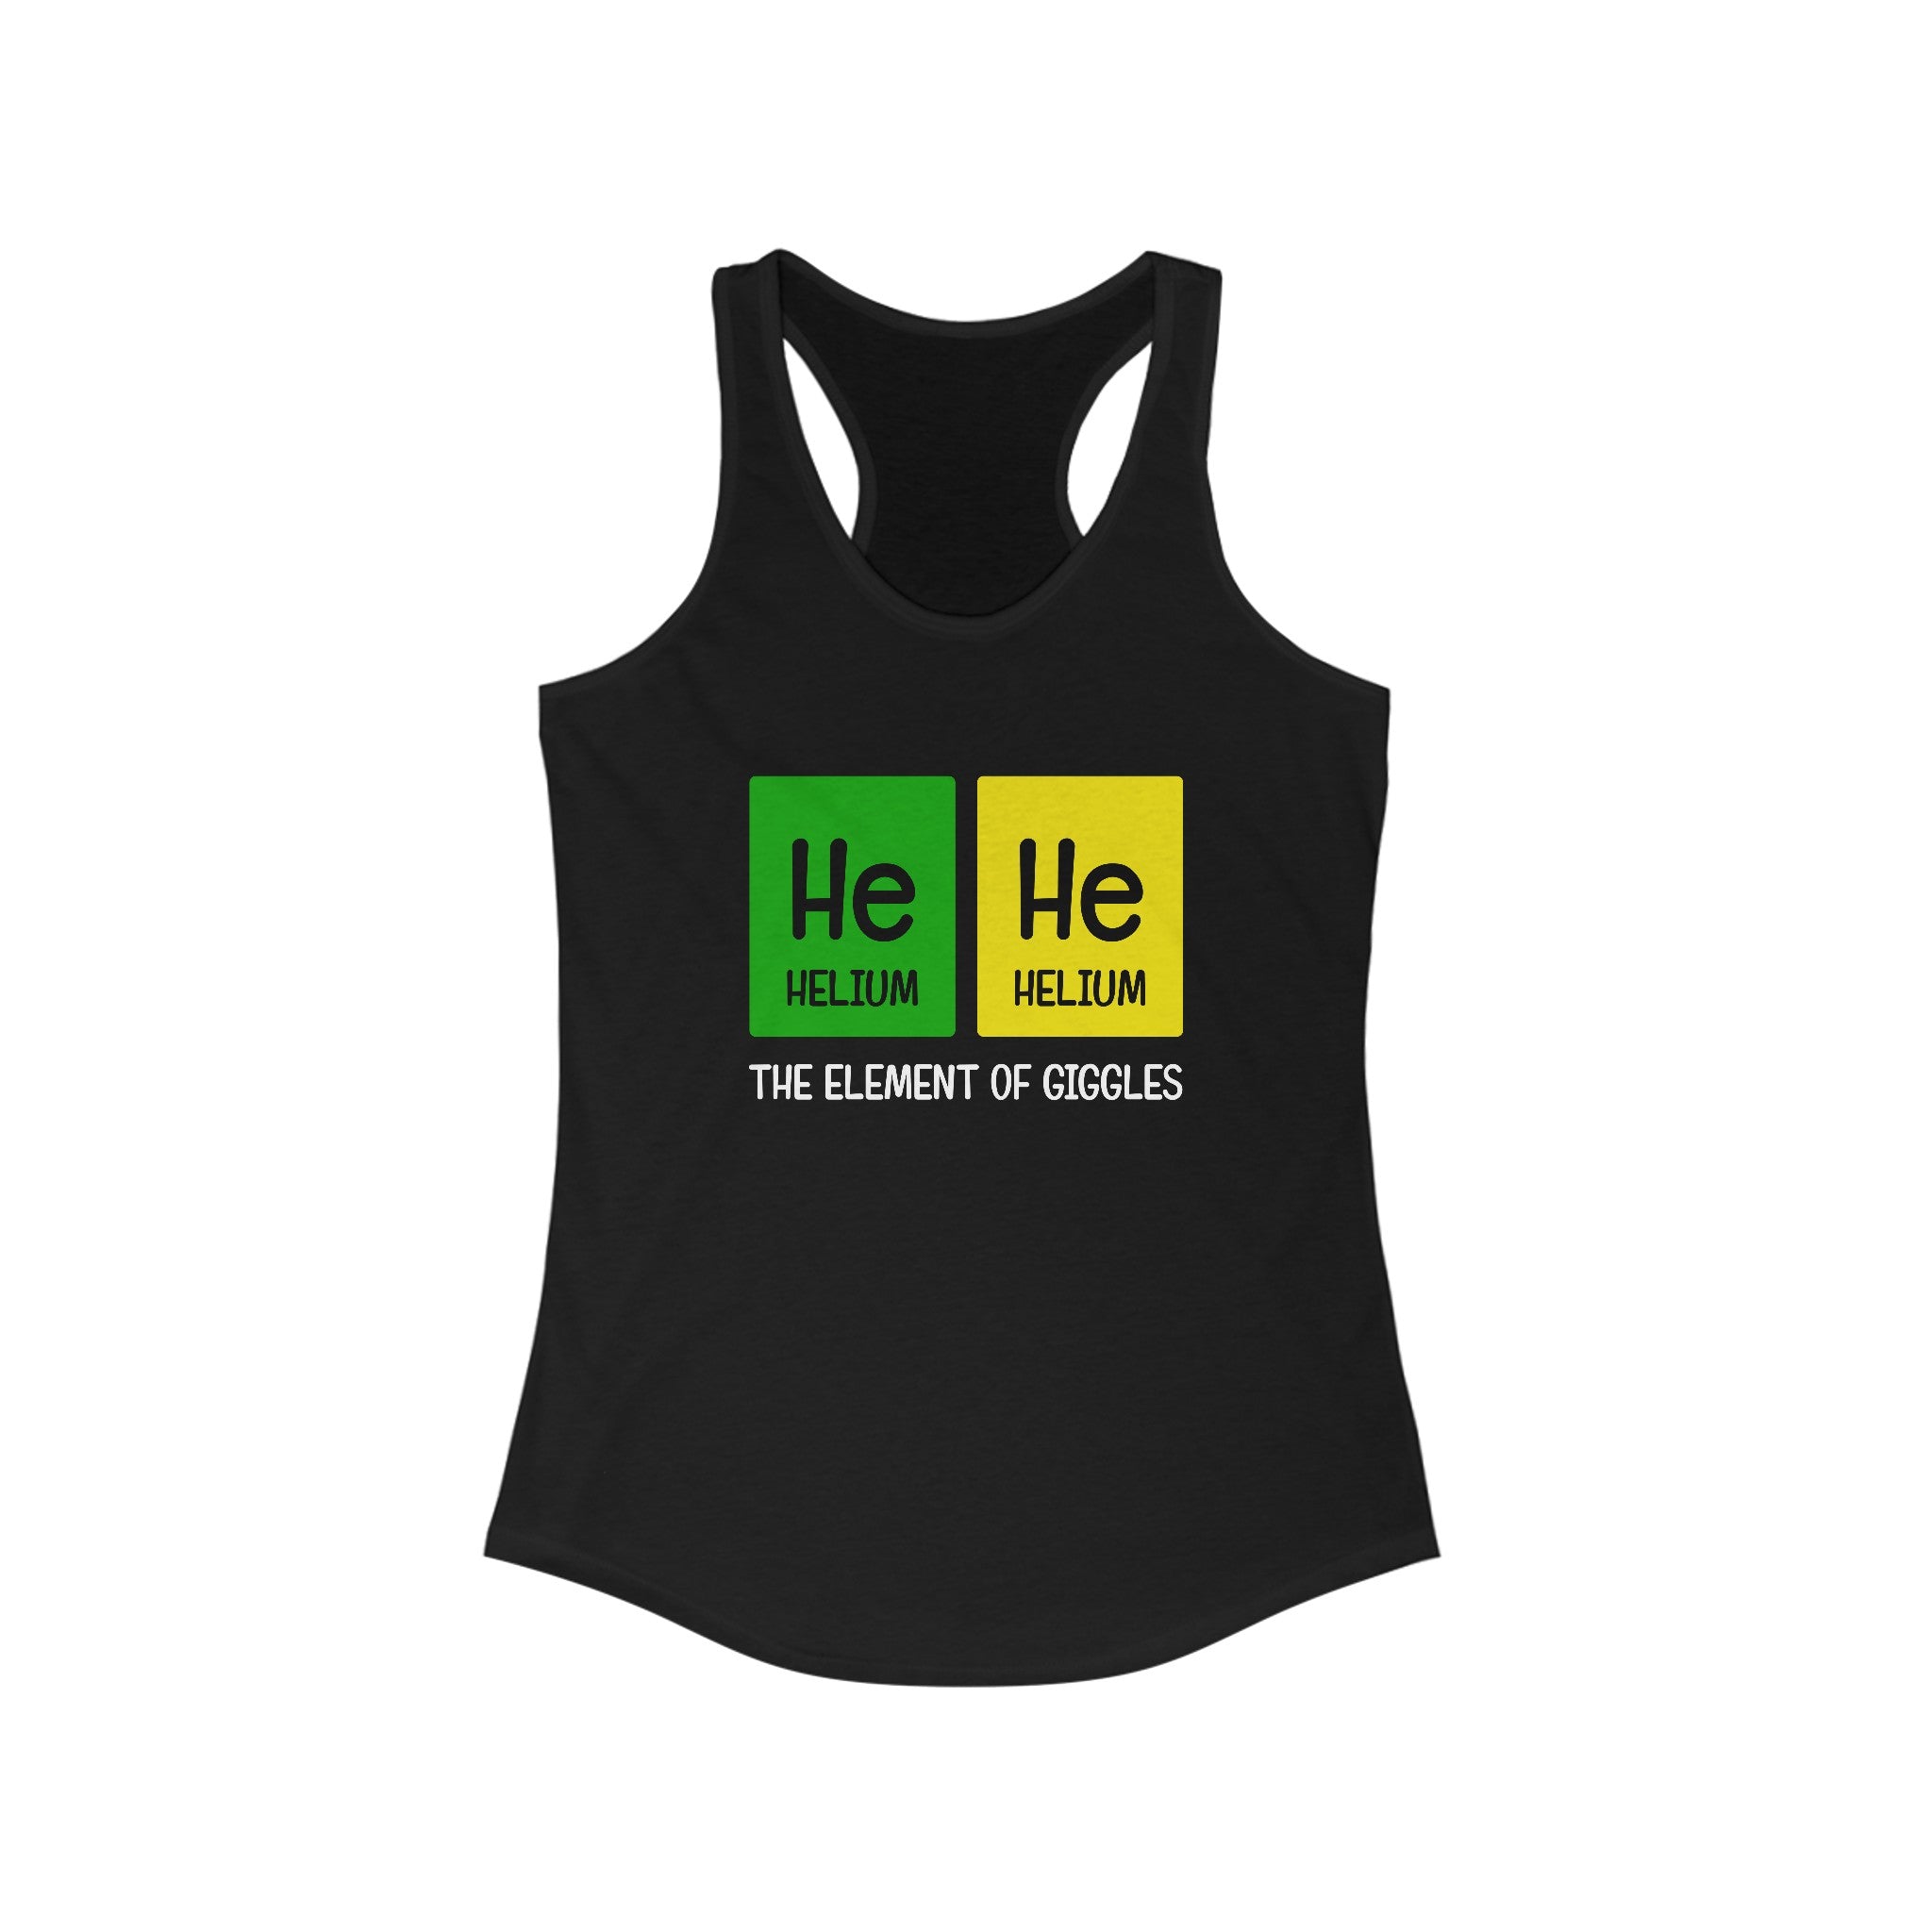 This He-He - Women's Racerback Tank, perfect for an active lifestyle, features a black design with periodic table elements for Helium (He) in green and yellow, and playful text "The Element of Giggles." Lightweight and fun, it's the ideal choice for both workouts and casual outings.